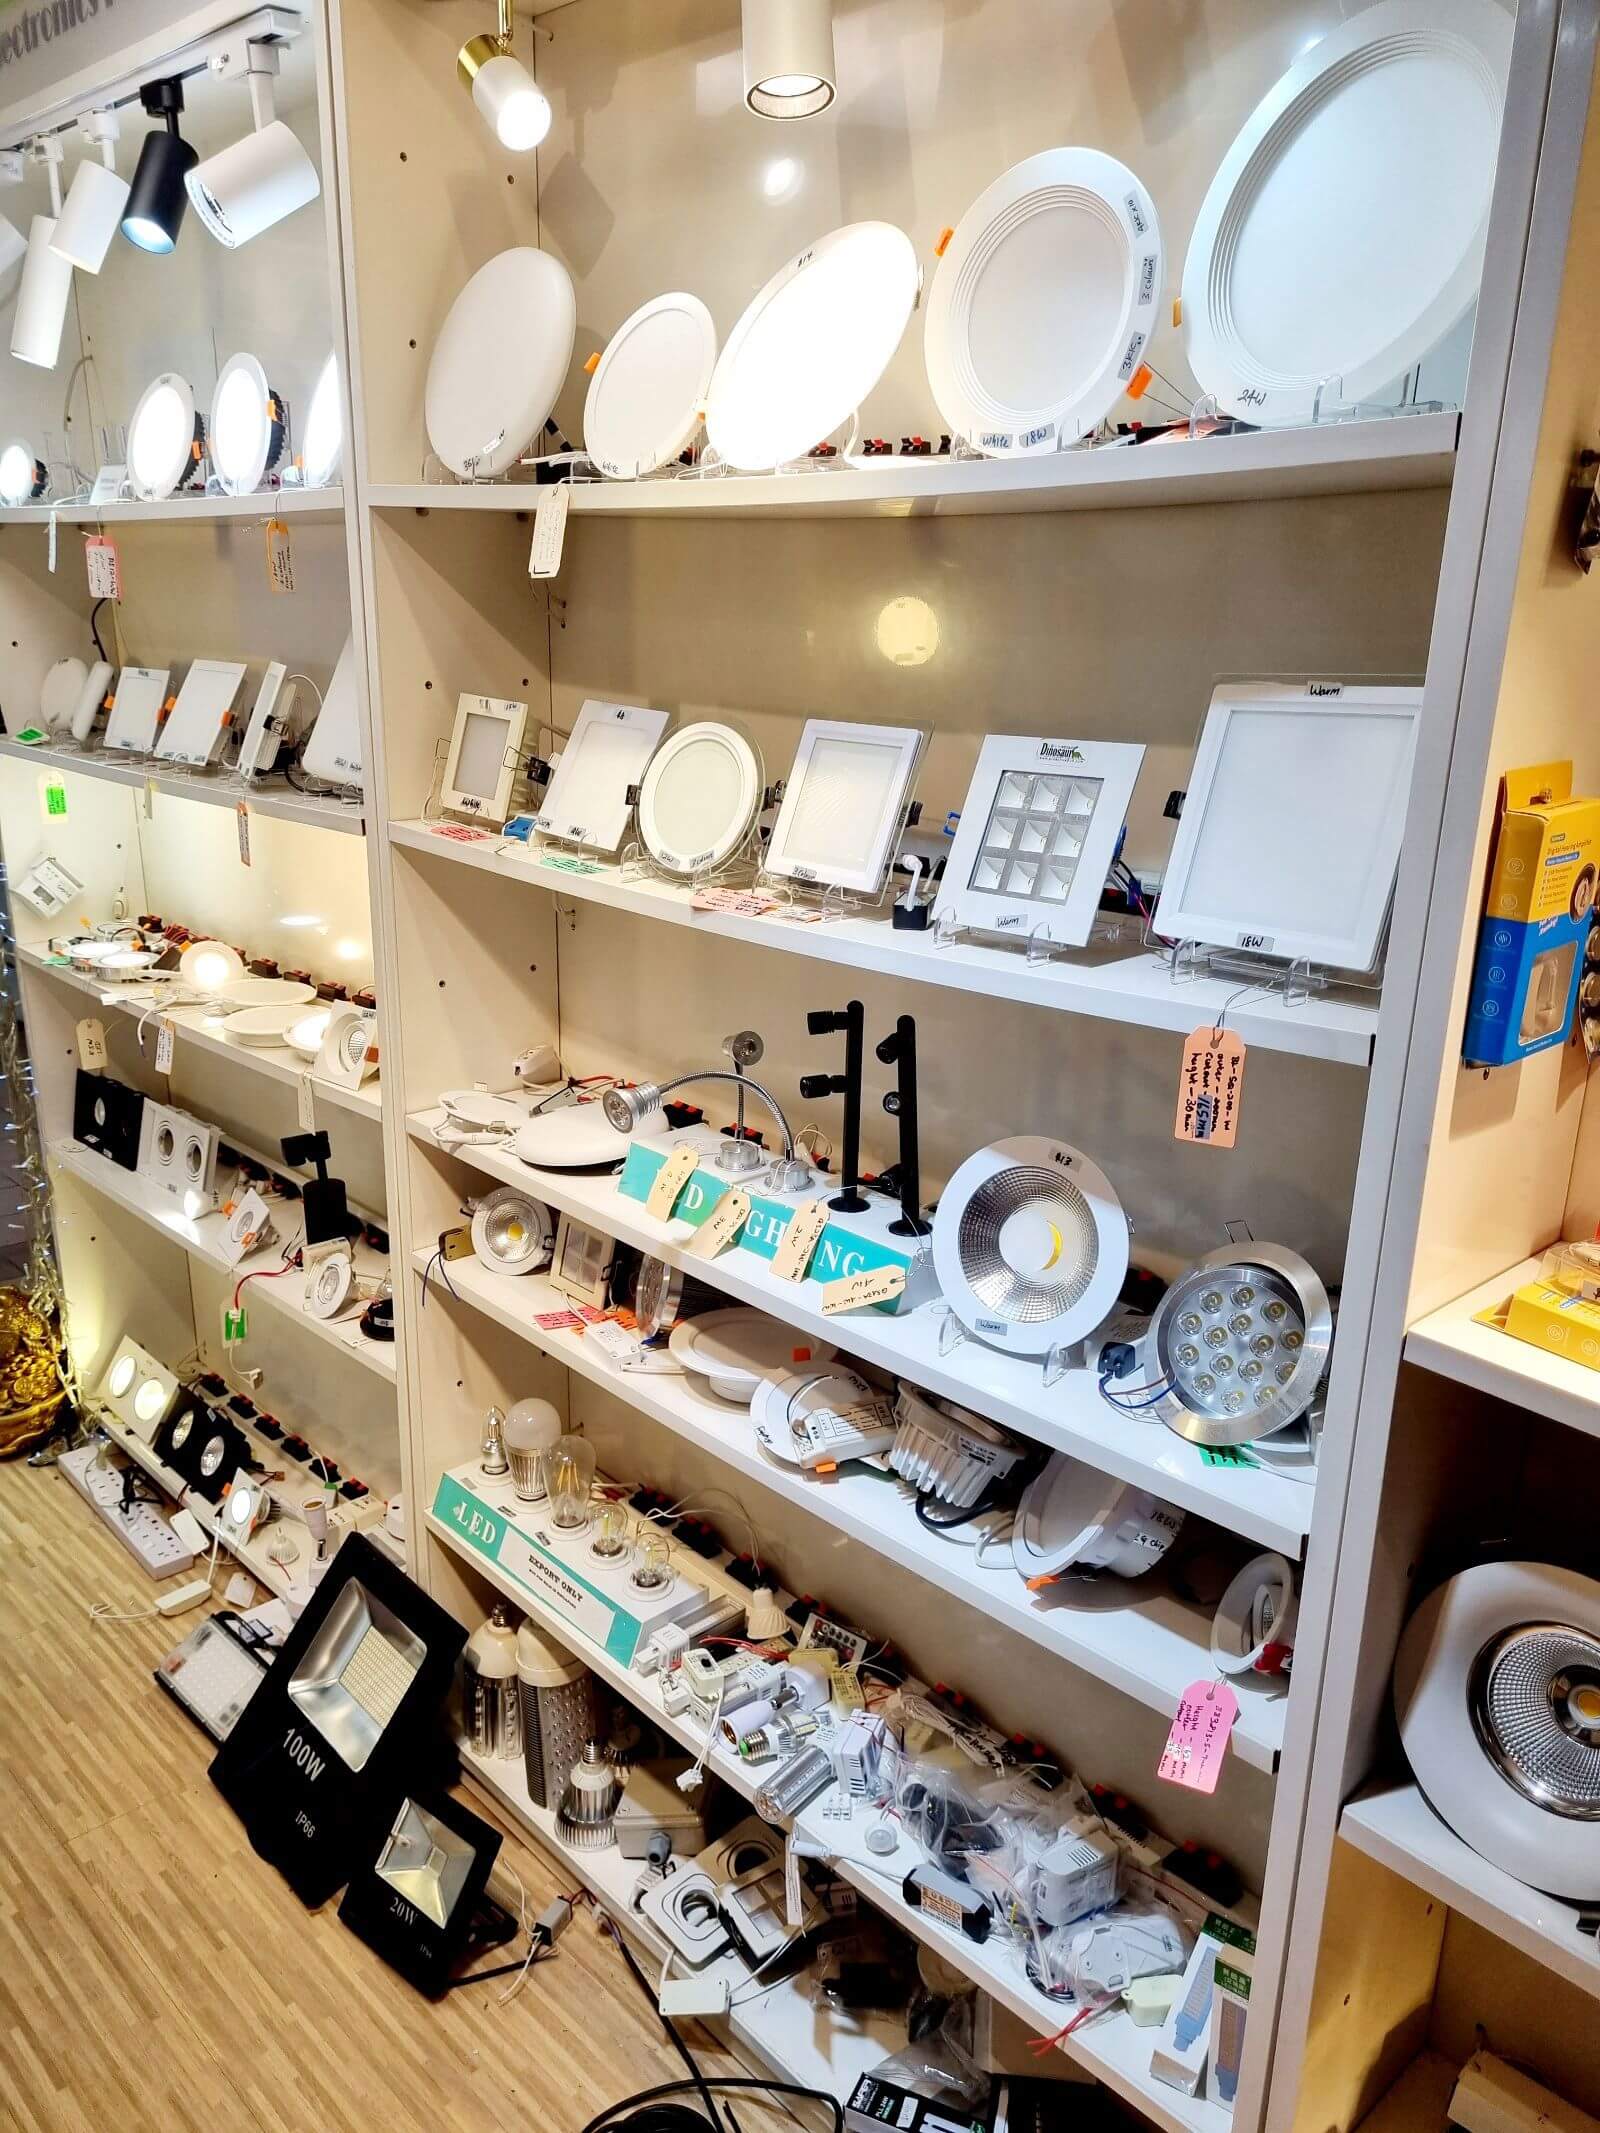 LED Lighting And Electrical accessories Business For Sales